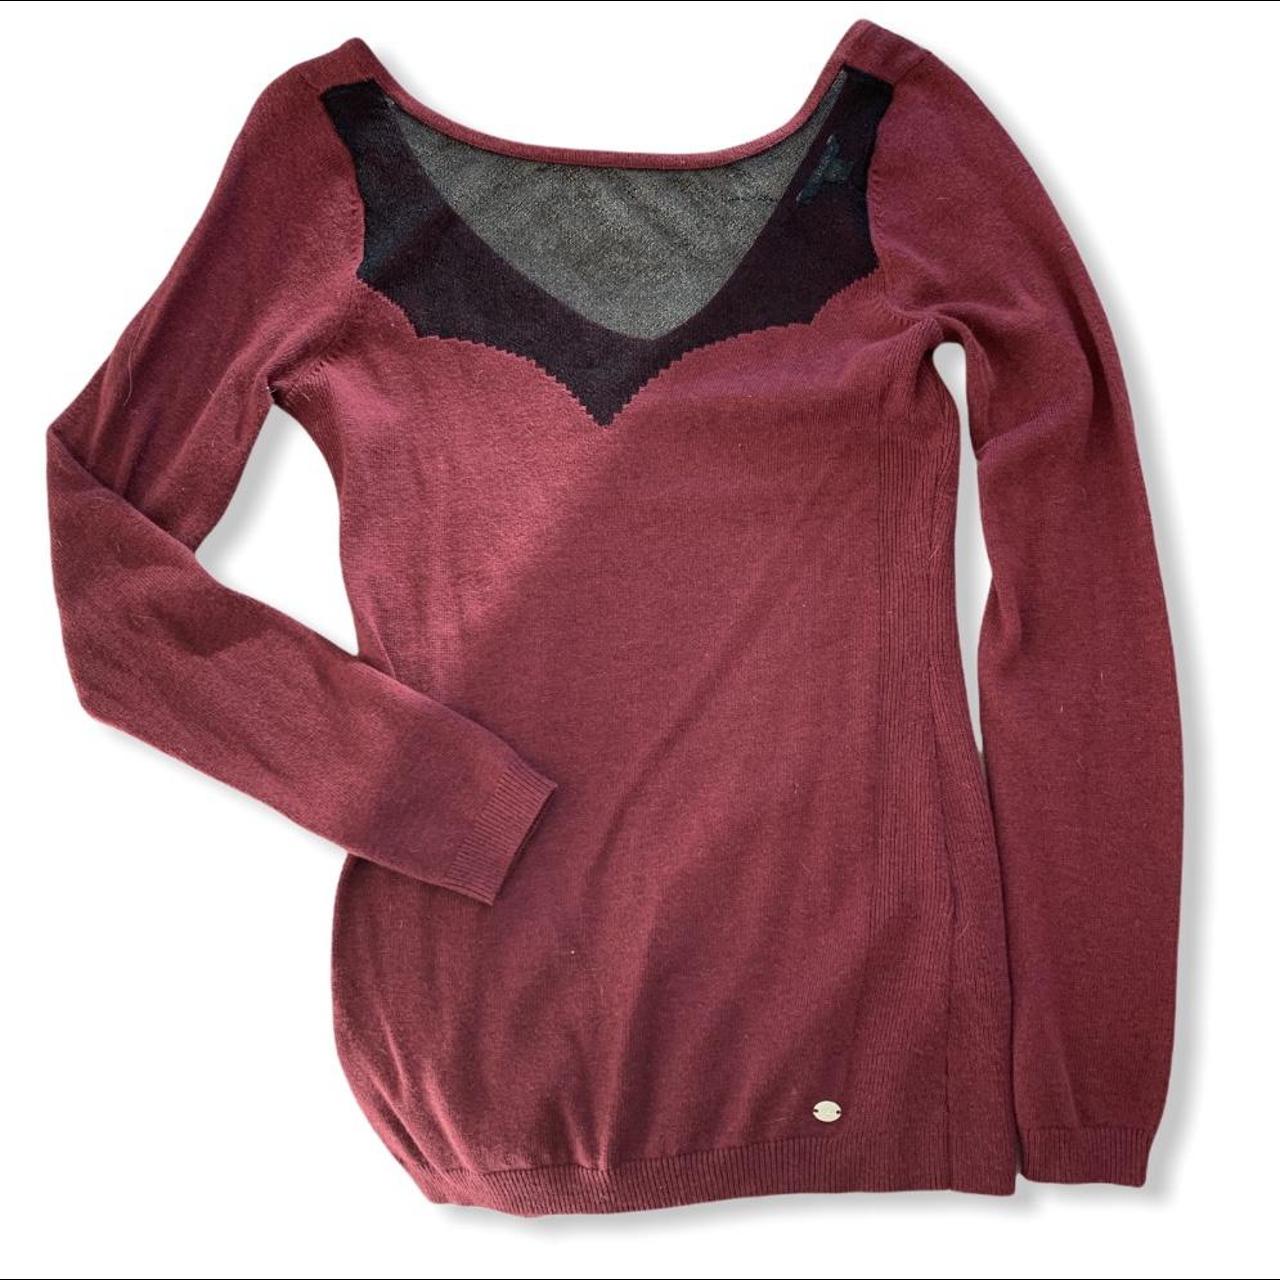 Product Image 1 - Vintage maroon mesh guess women’s